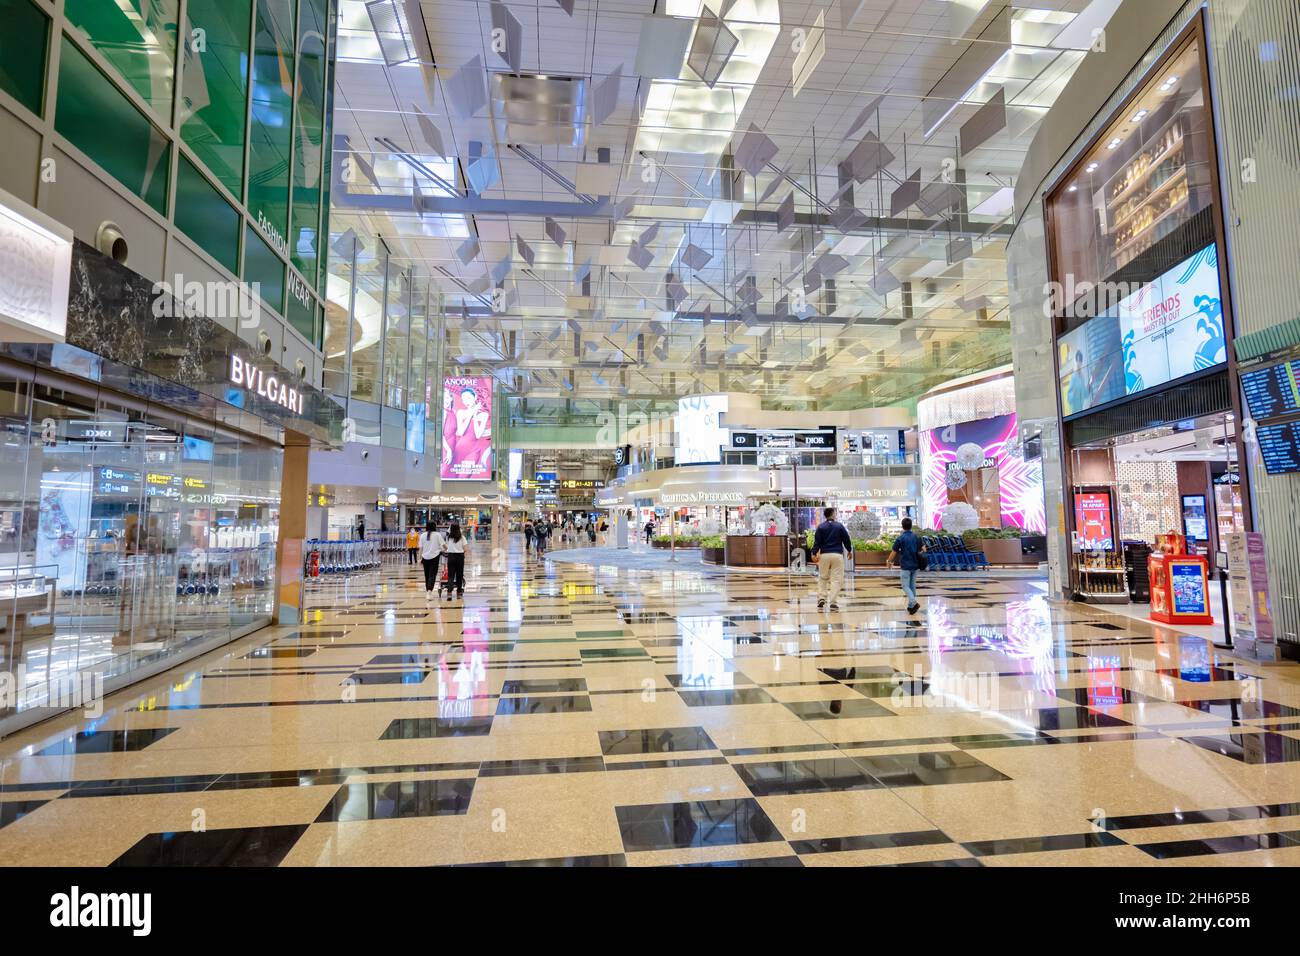 Singapore - January 2022: Singapore Changi Airport duty free shop area architecture. Singapore Changi Airport is one of the largest airports in Asia. Stock Photo